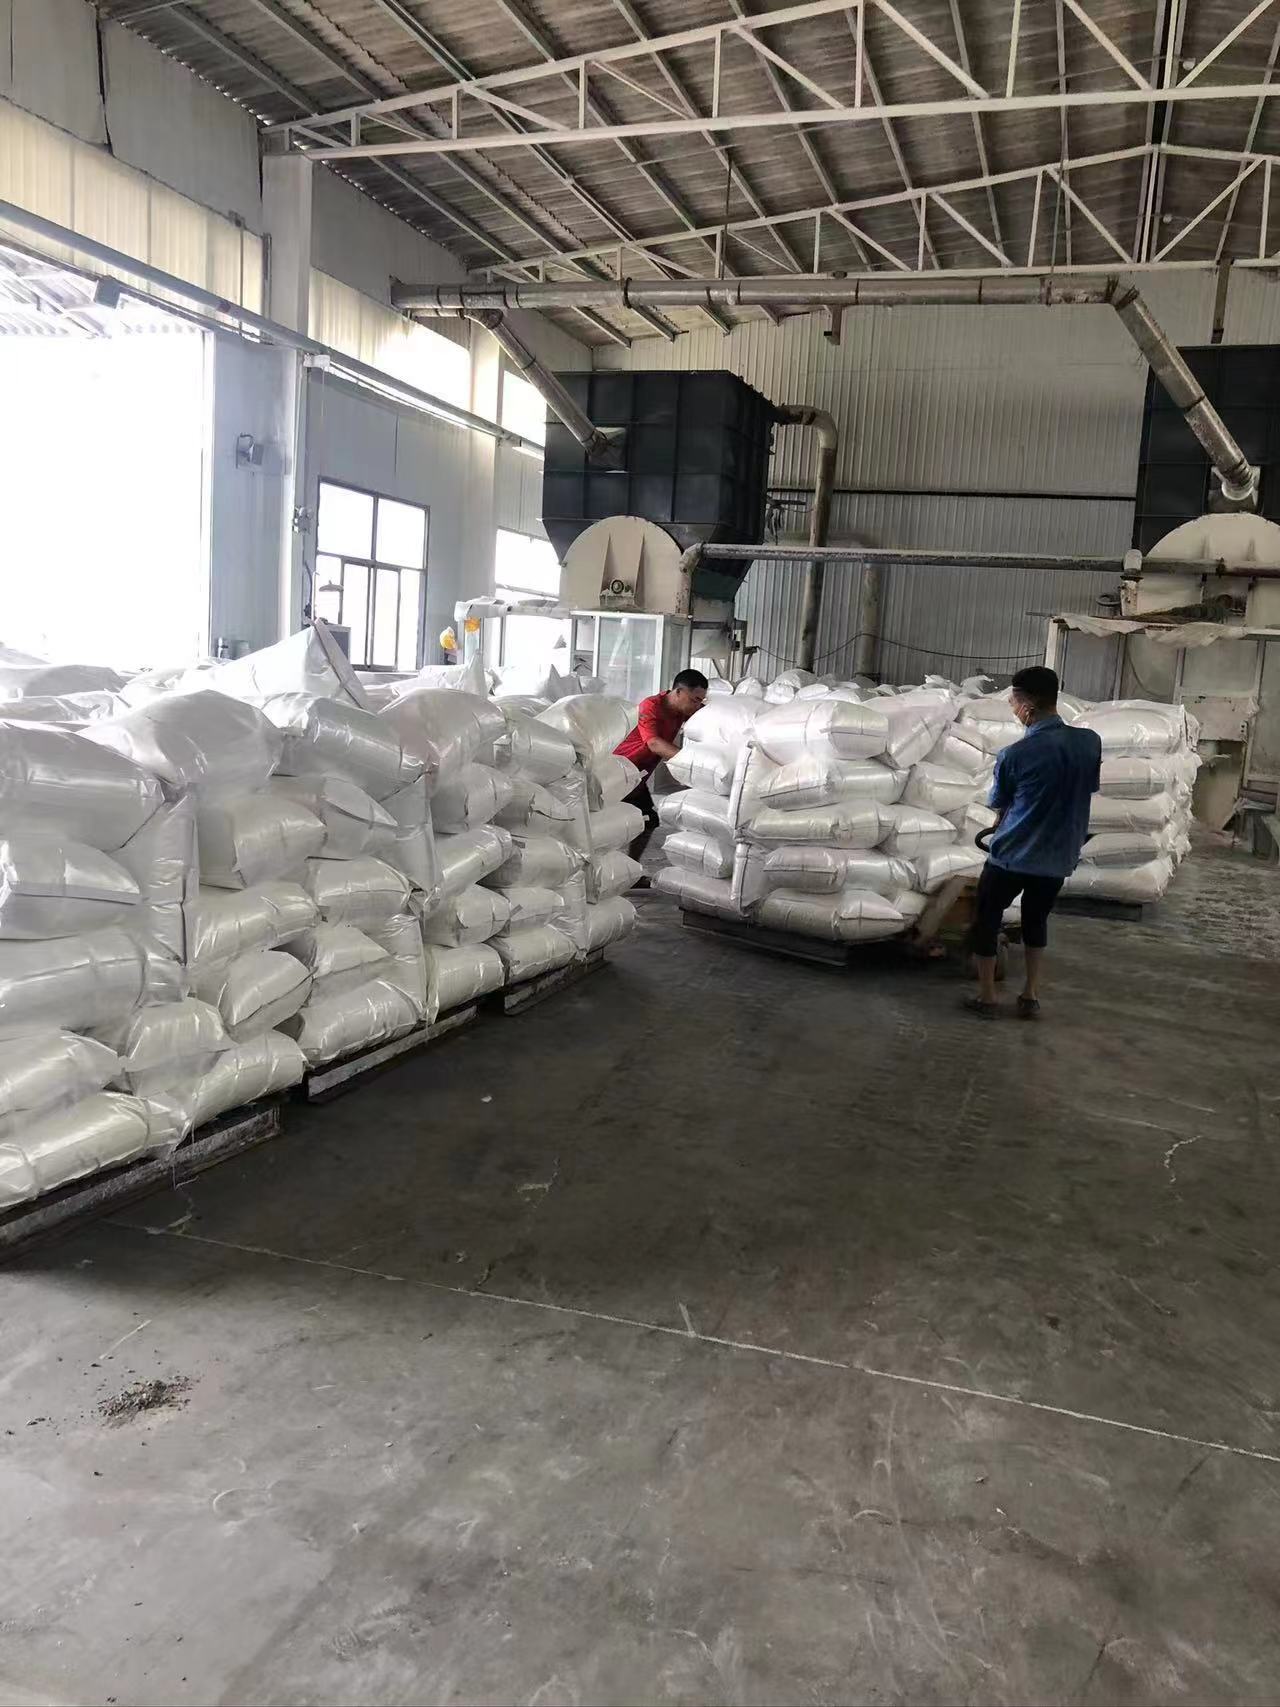 Popular Good HPMC Used in Wall Putty Workability Industrial Grade Hydroxypropyl Methyl Cellulose